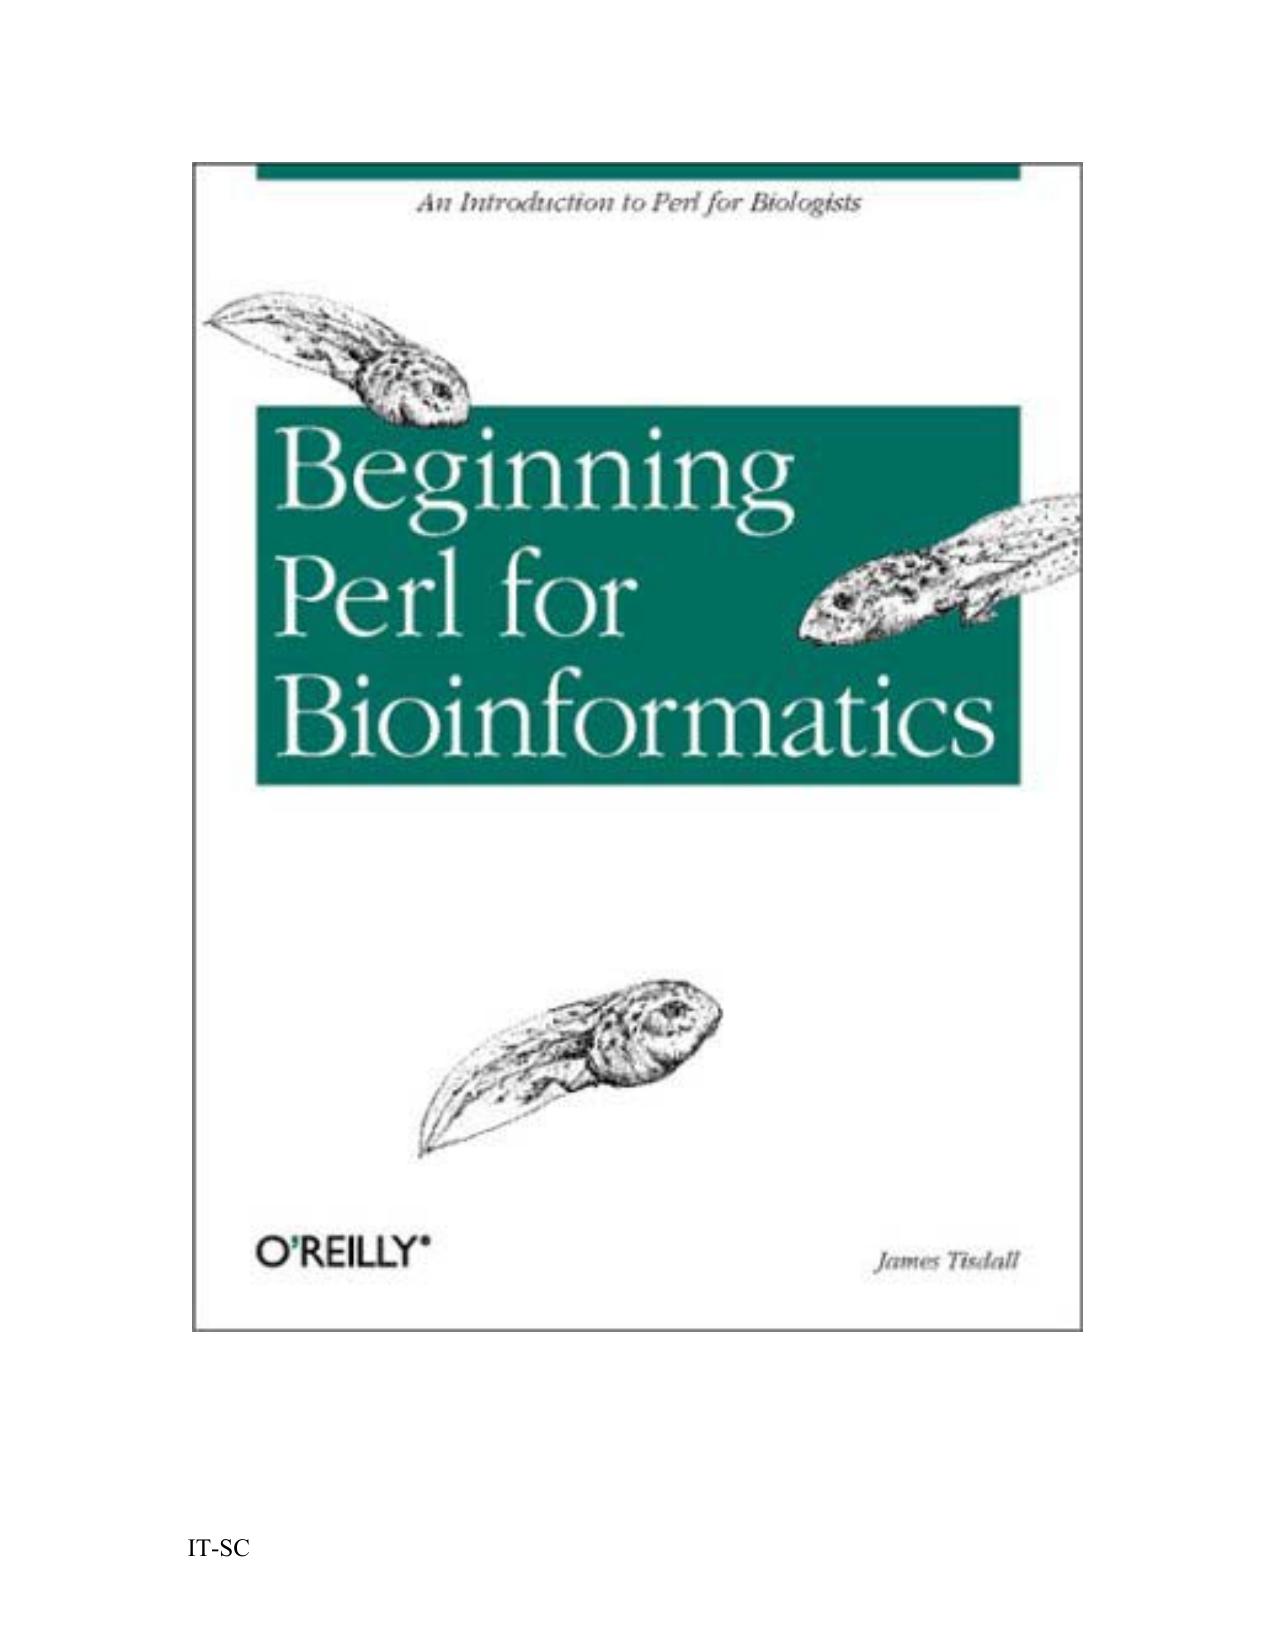 Beginning Perl for Bioinformatics by Administrator